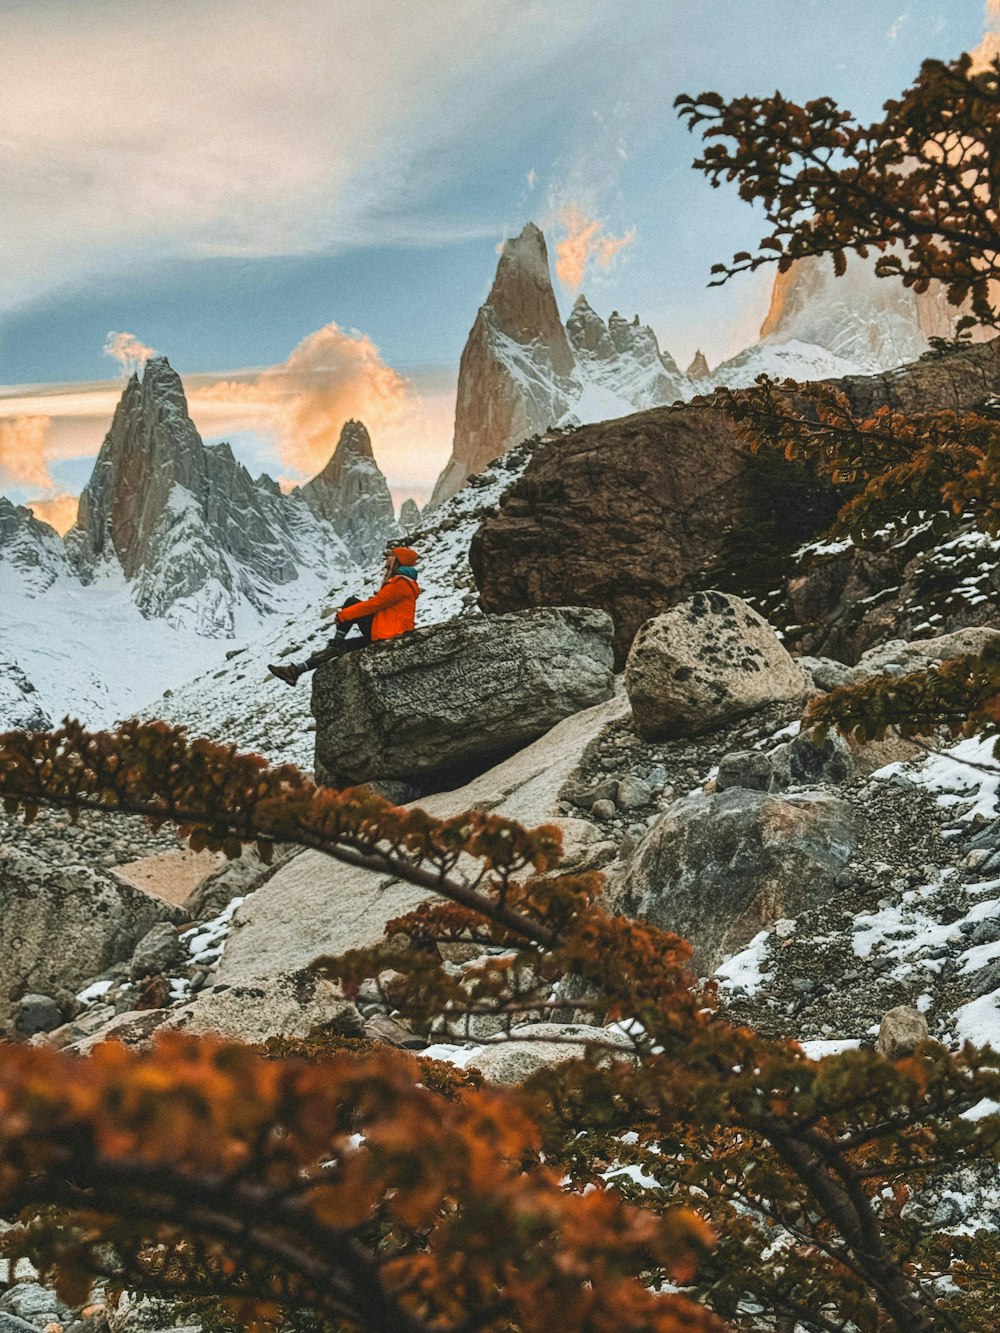 a person sitting on a rock in the mountains